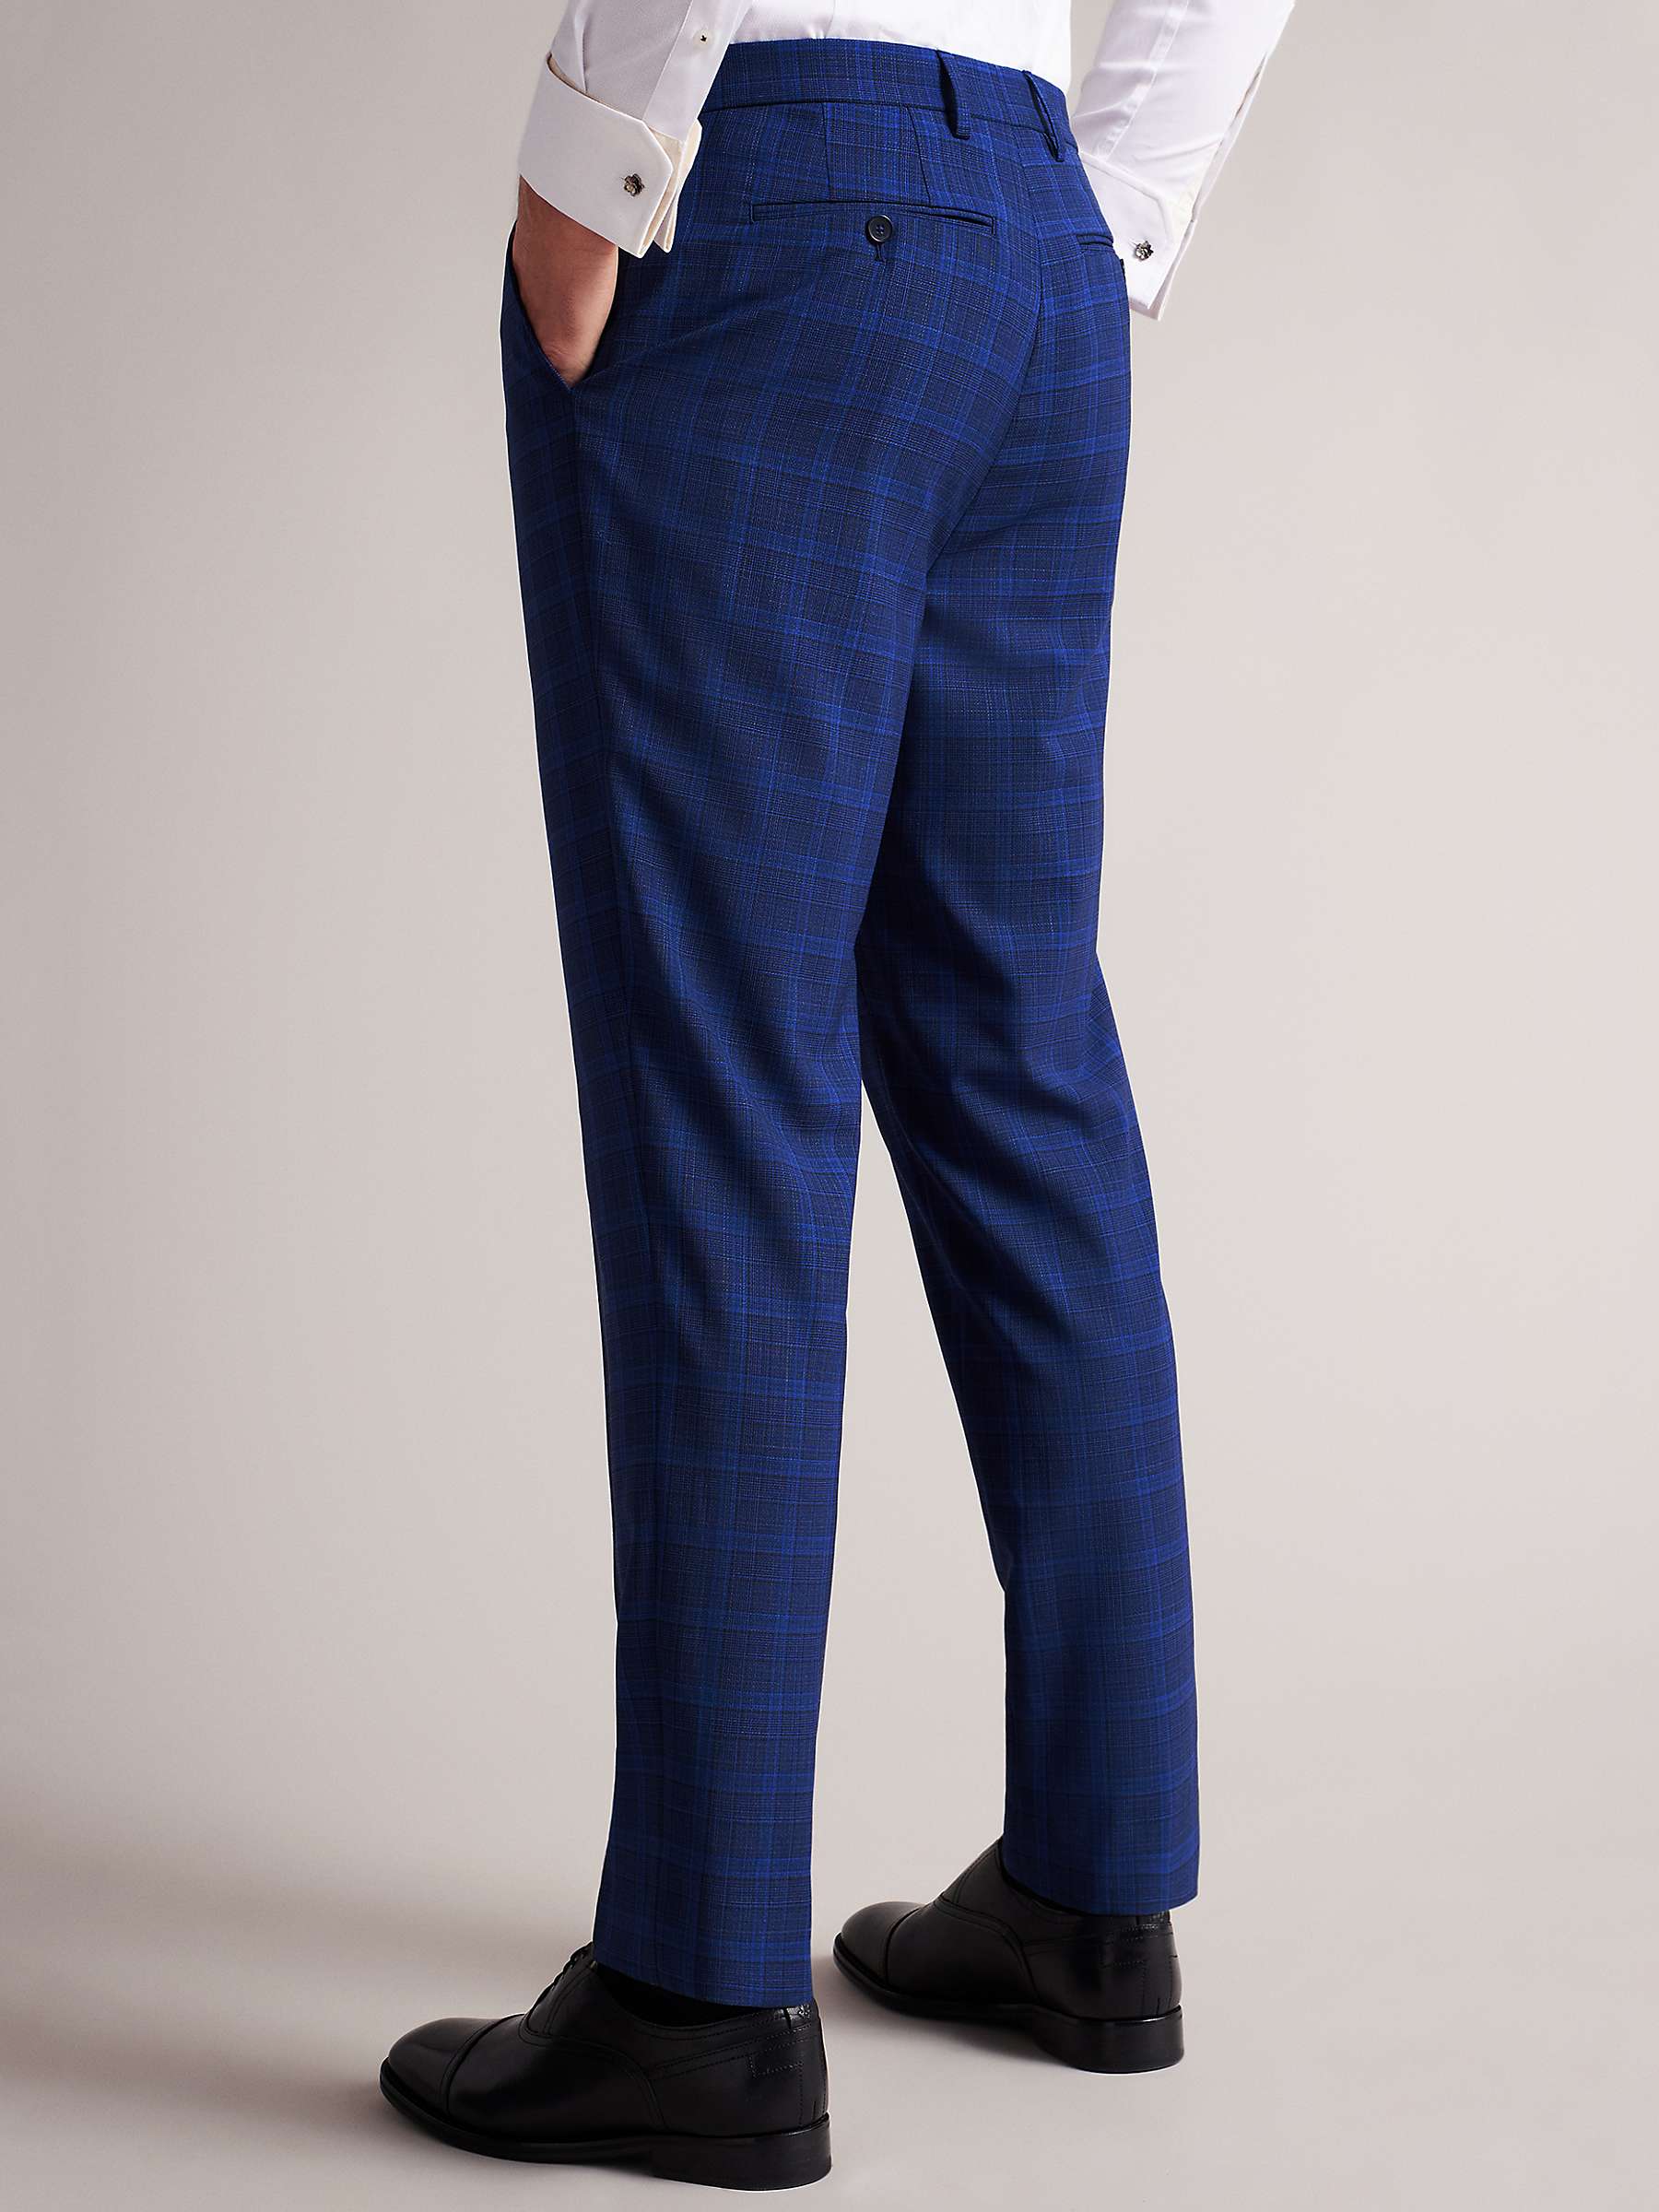 Buy Ted Baker Apollot Slim Fit Check Trousers, Dark Blue Online at johnlewis.com